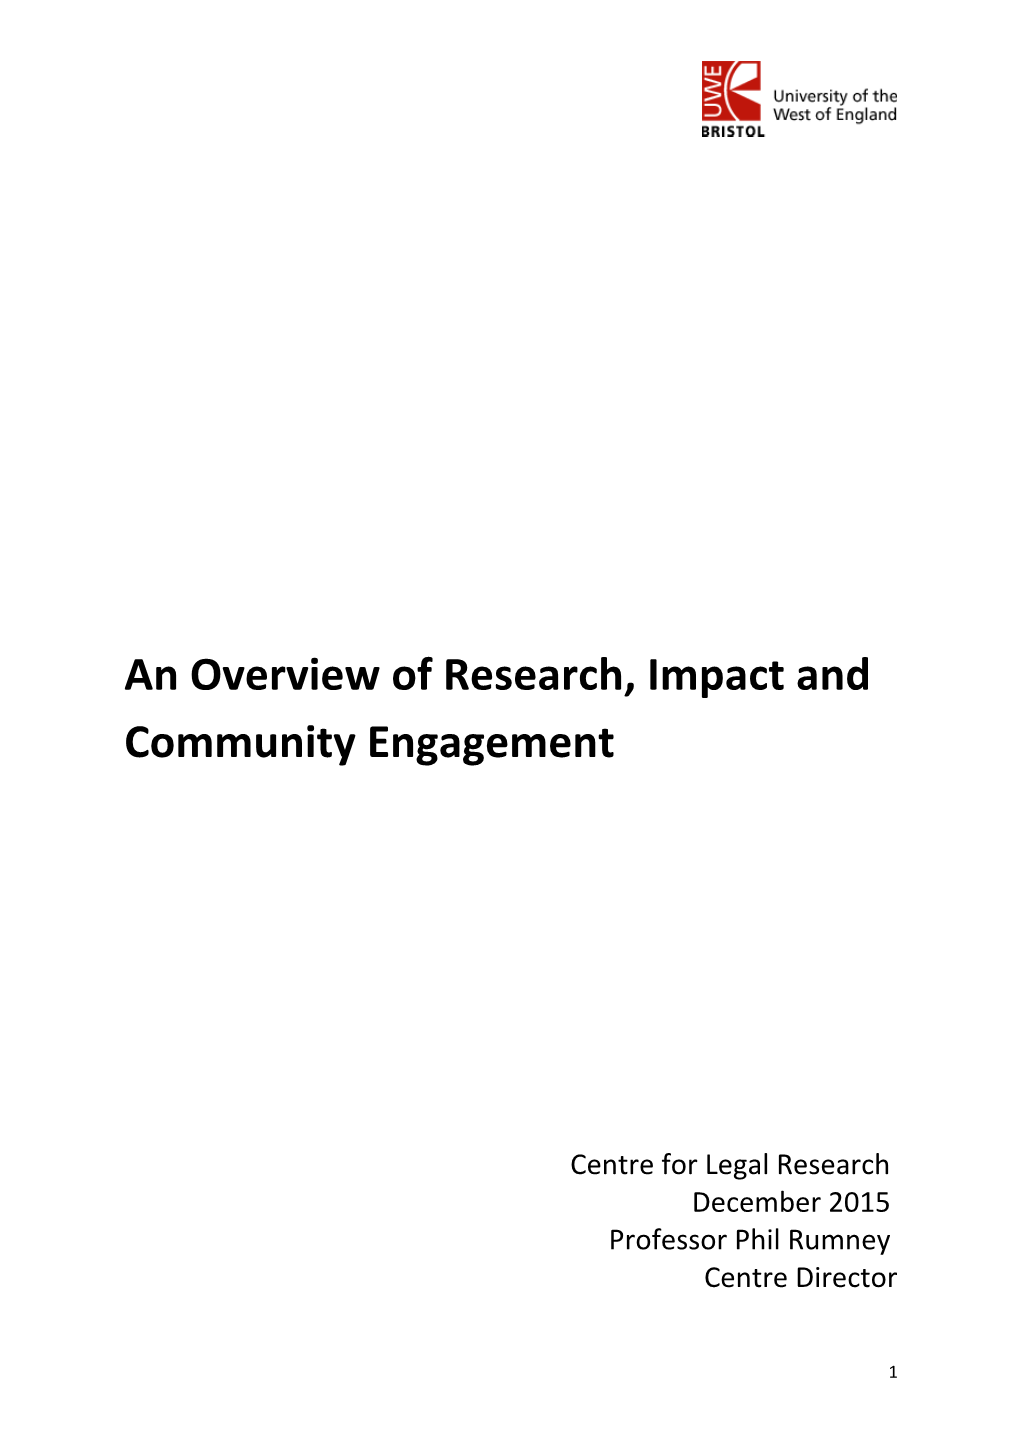 An Overview of Research, Impact and Community Engagement